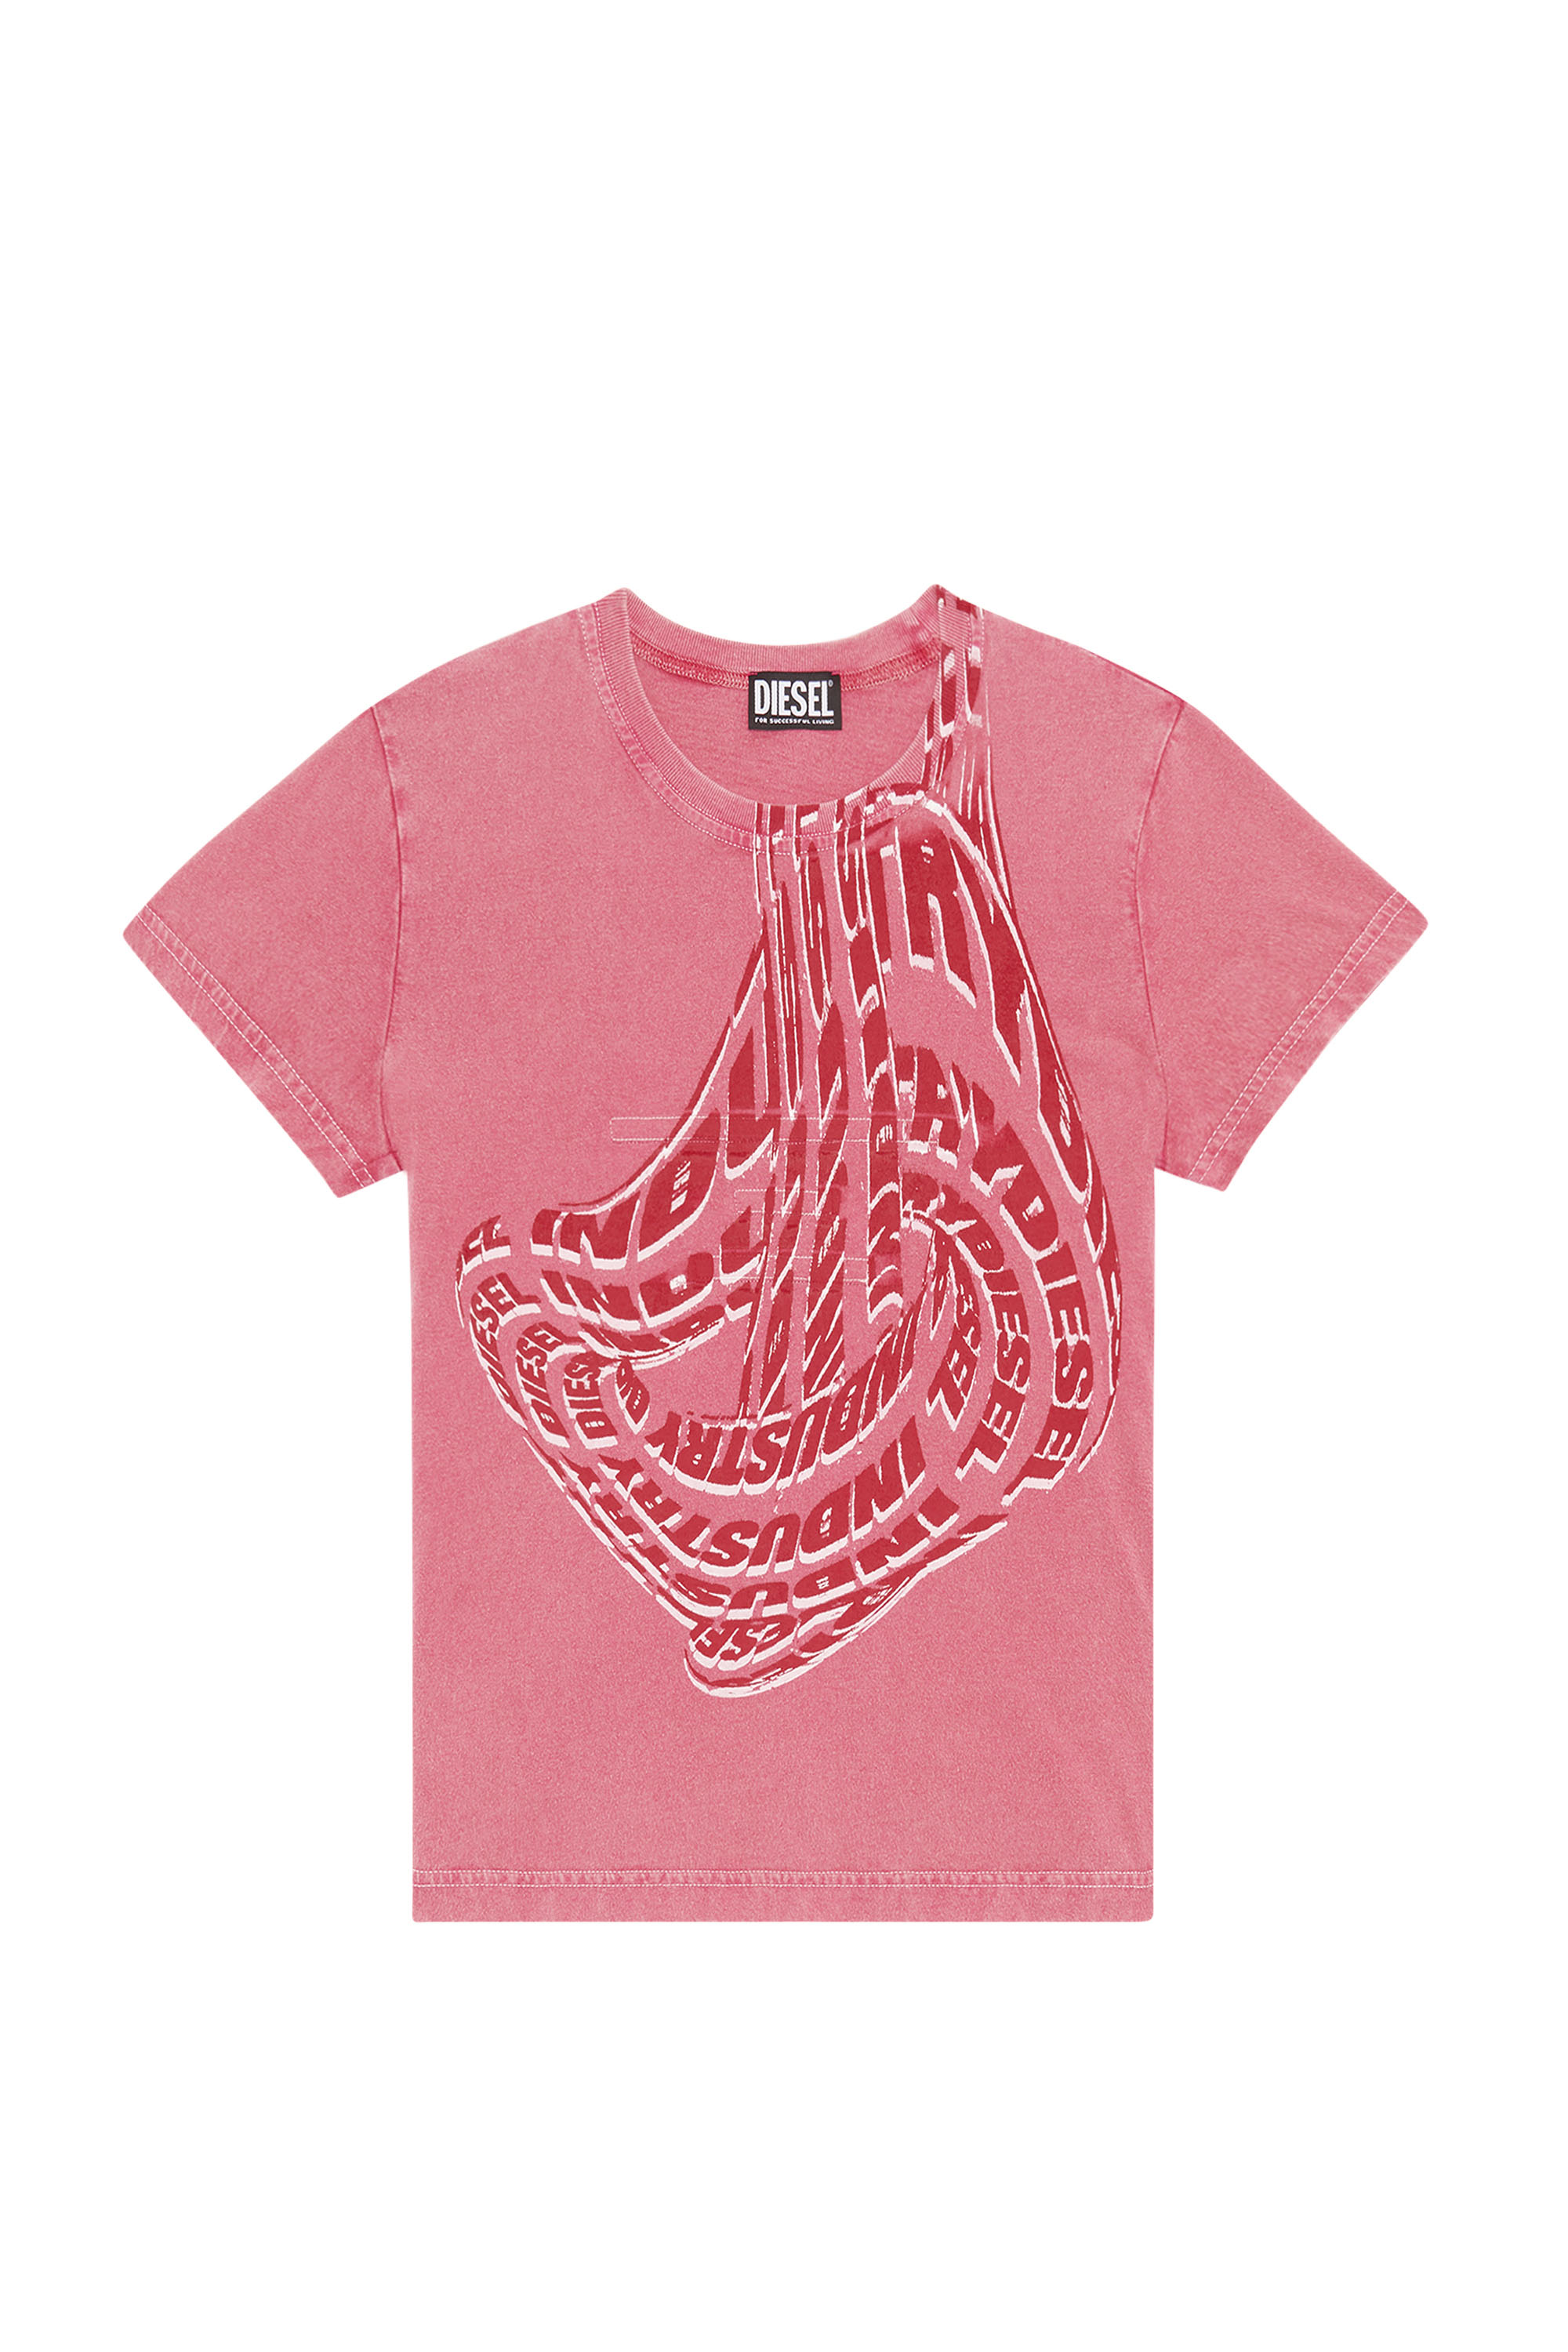 Diesel Acid-wash T-shirt With Graphic Logo Print In Pink